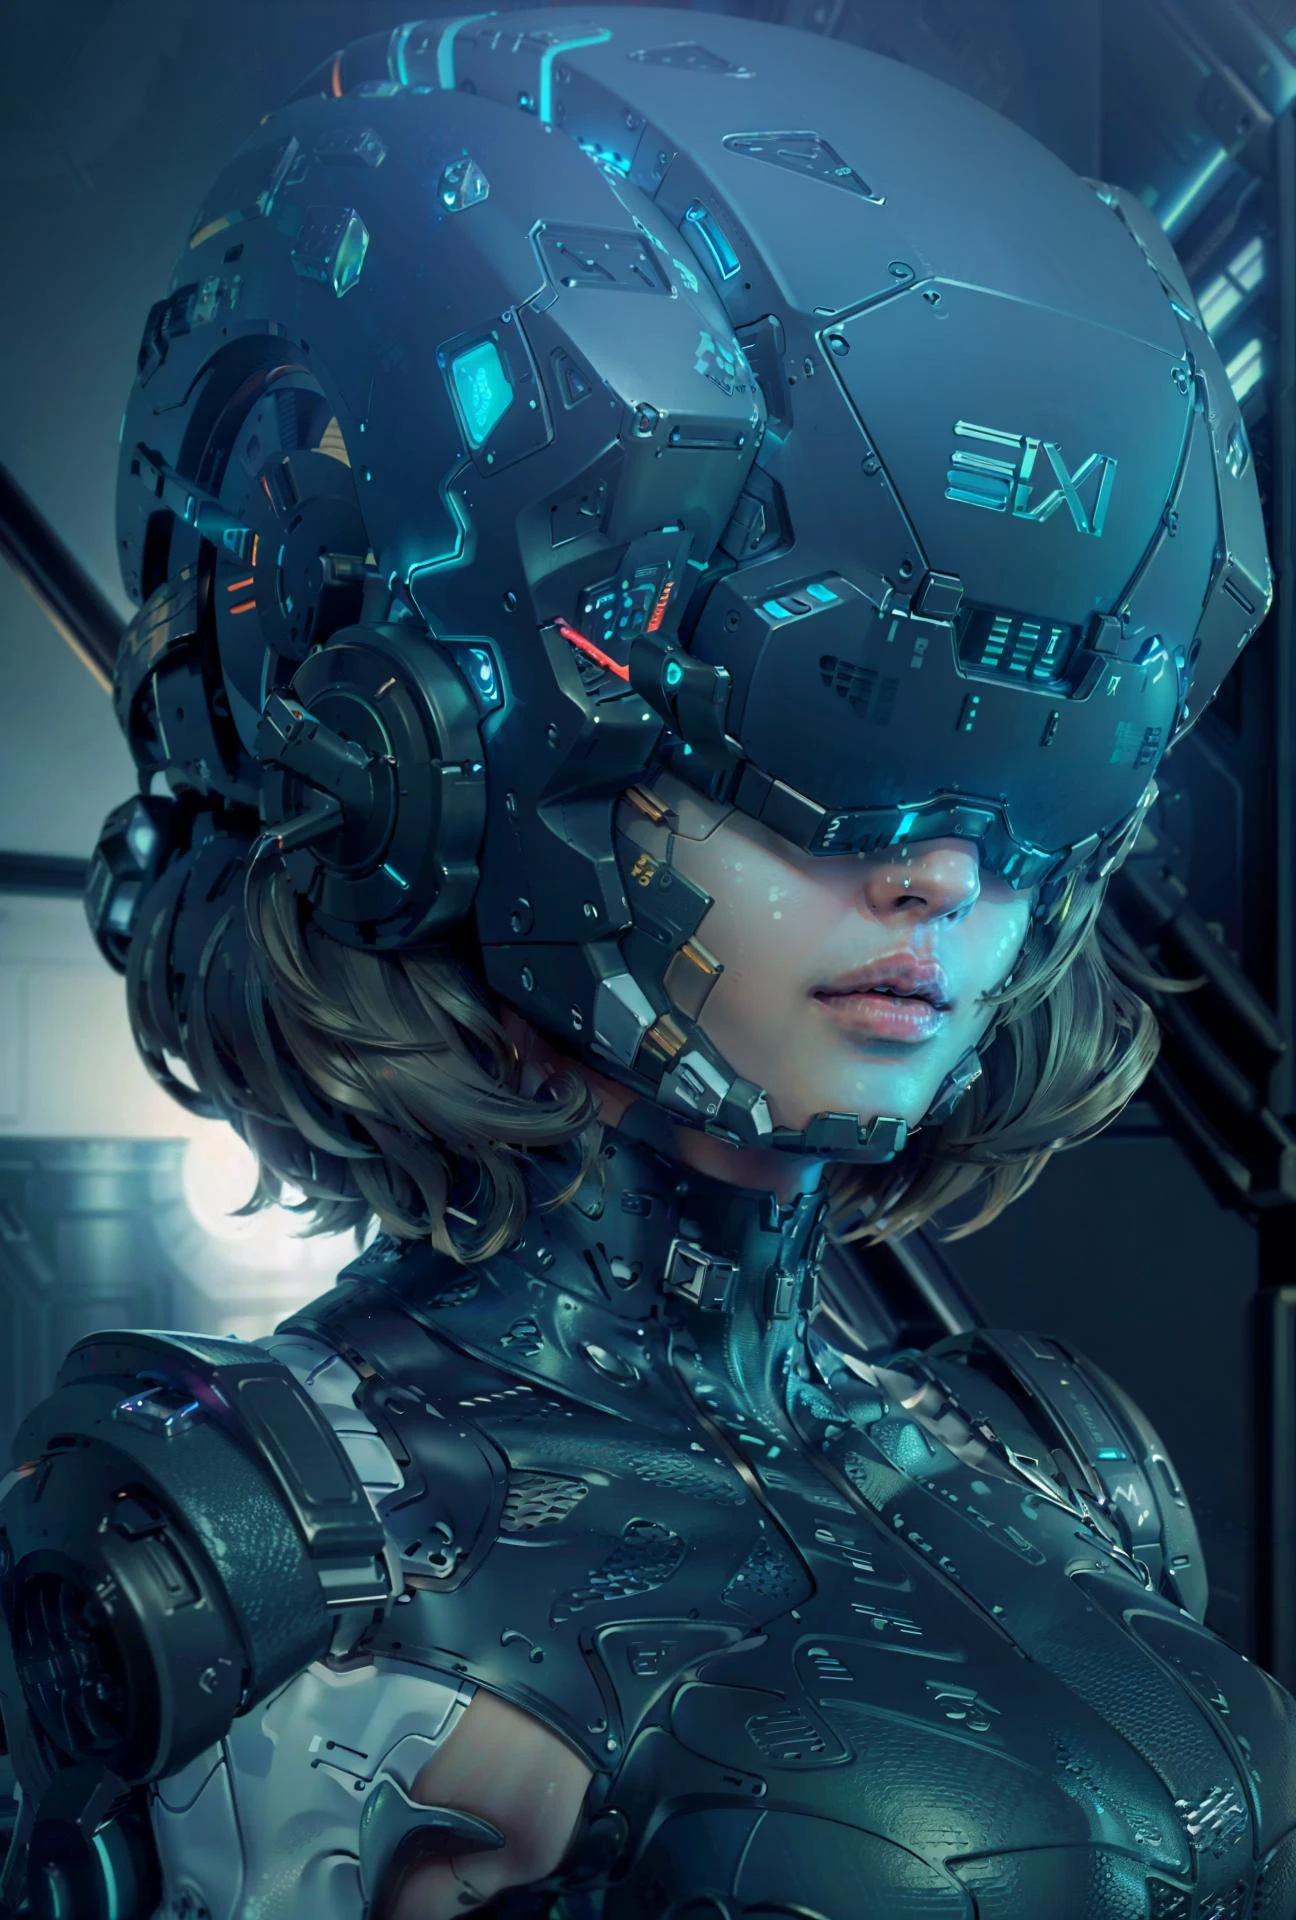 ((Best quality)), ((masterpiece)), (highly detailed:1.3), 3D,rfktr_technotrex, beautiful cyberpunk woman with voluminous hair,(wearing head-mounted display that is chunky and hi-tech:1.2),hacking a computer terminal,computer servers, LCD screens, fibre optic cables, corporate logos,HDR (High Dynamic Range),Ray Tracing,NVIDIA RTX,Super-Resolution,Unreal 5,Subsurface scattering,PBR Texturing,Post-processing,Anisotropic Filtering,Depth-of-field,Maximum clarity and sharpness,Multi-layered textures,Albedo and Specular maps,Surface shading,Accurate simulation of light-material interaction,Perfect proportions,Octane Render,Two-tone lighting,Low ISO,White balance,Rule of thirds,Wide aperature,8K RAW,Efficient Sub-Pixel,sub-pixel convolution,luminescent particles,light scattering,Tyndall effect 